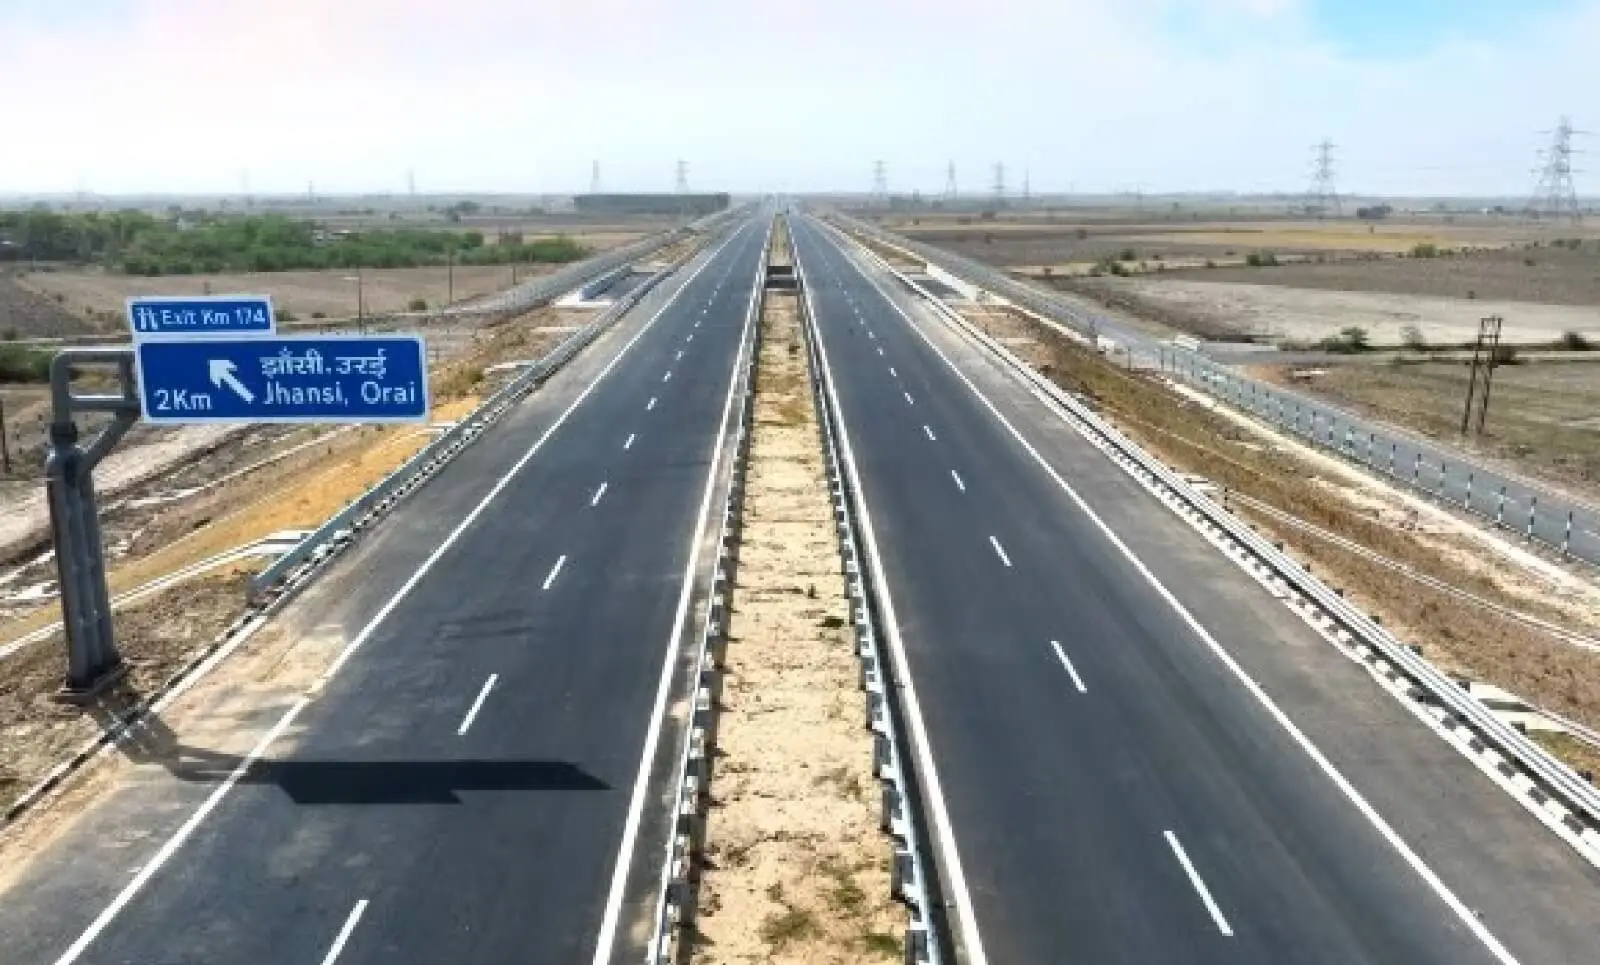 UP Plans to Generate 550 MW of Power by Solarizing Bundelkhand Expressway